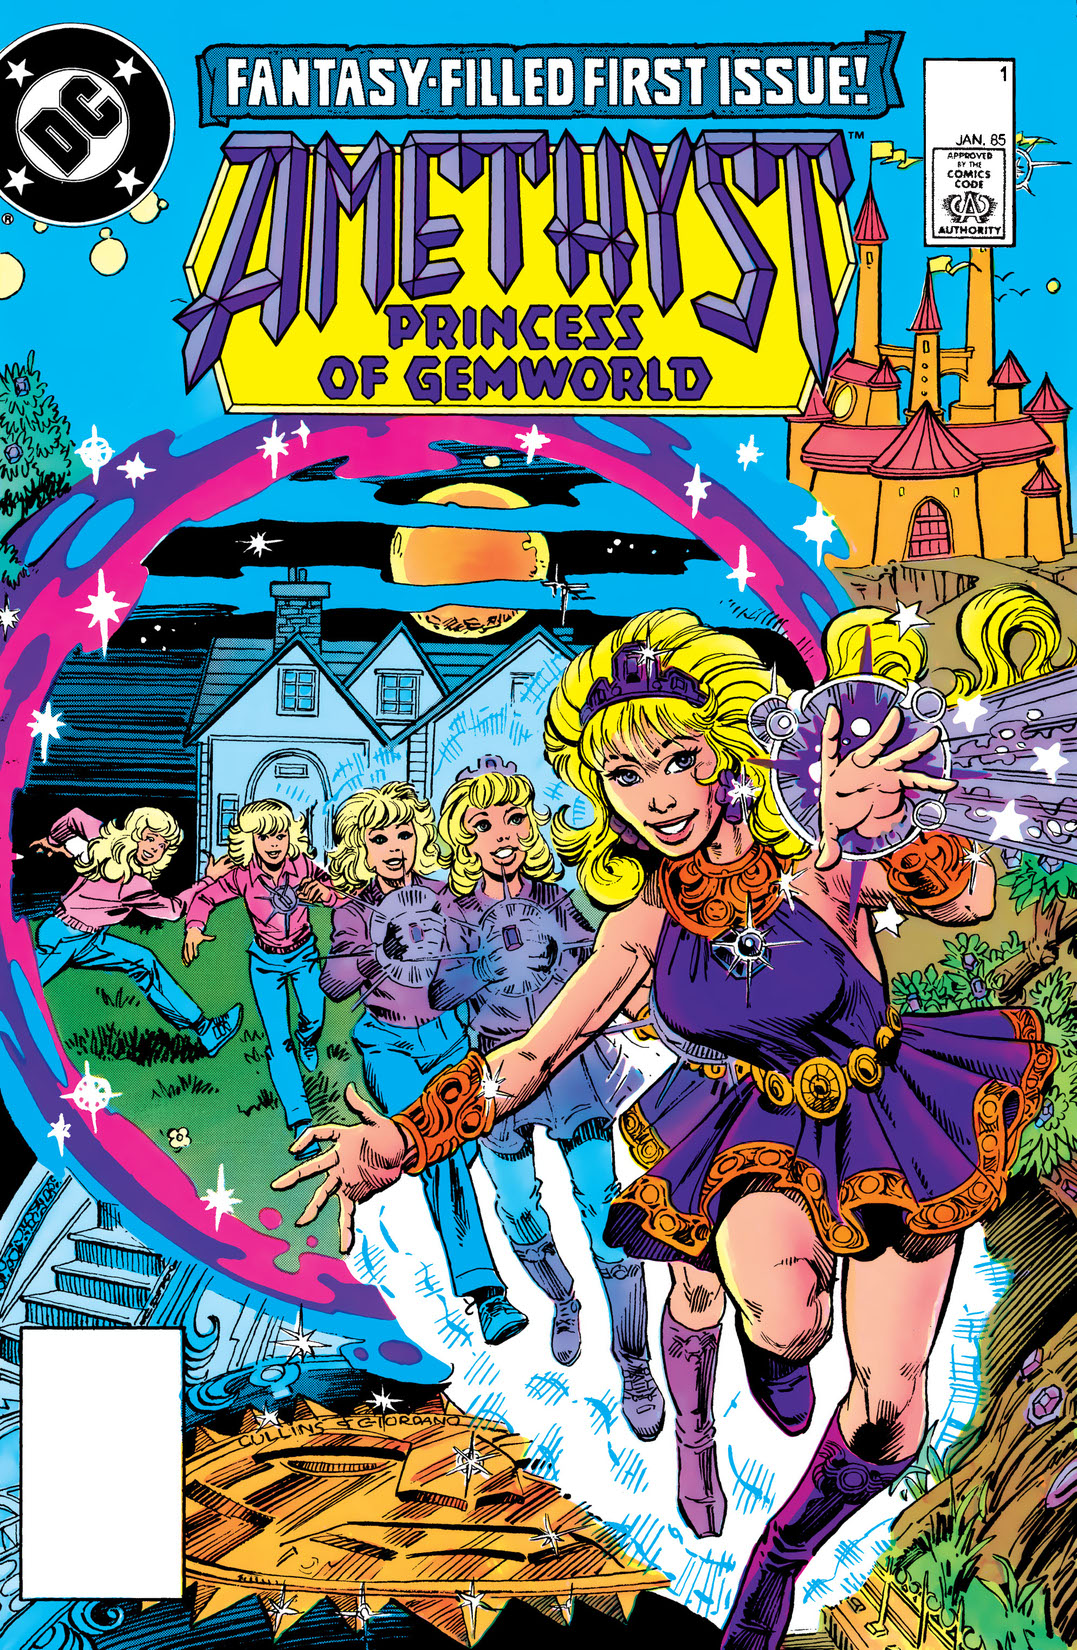 Amethyst: Princess of Gemworld (1985-) #1 preview images